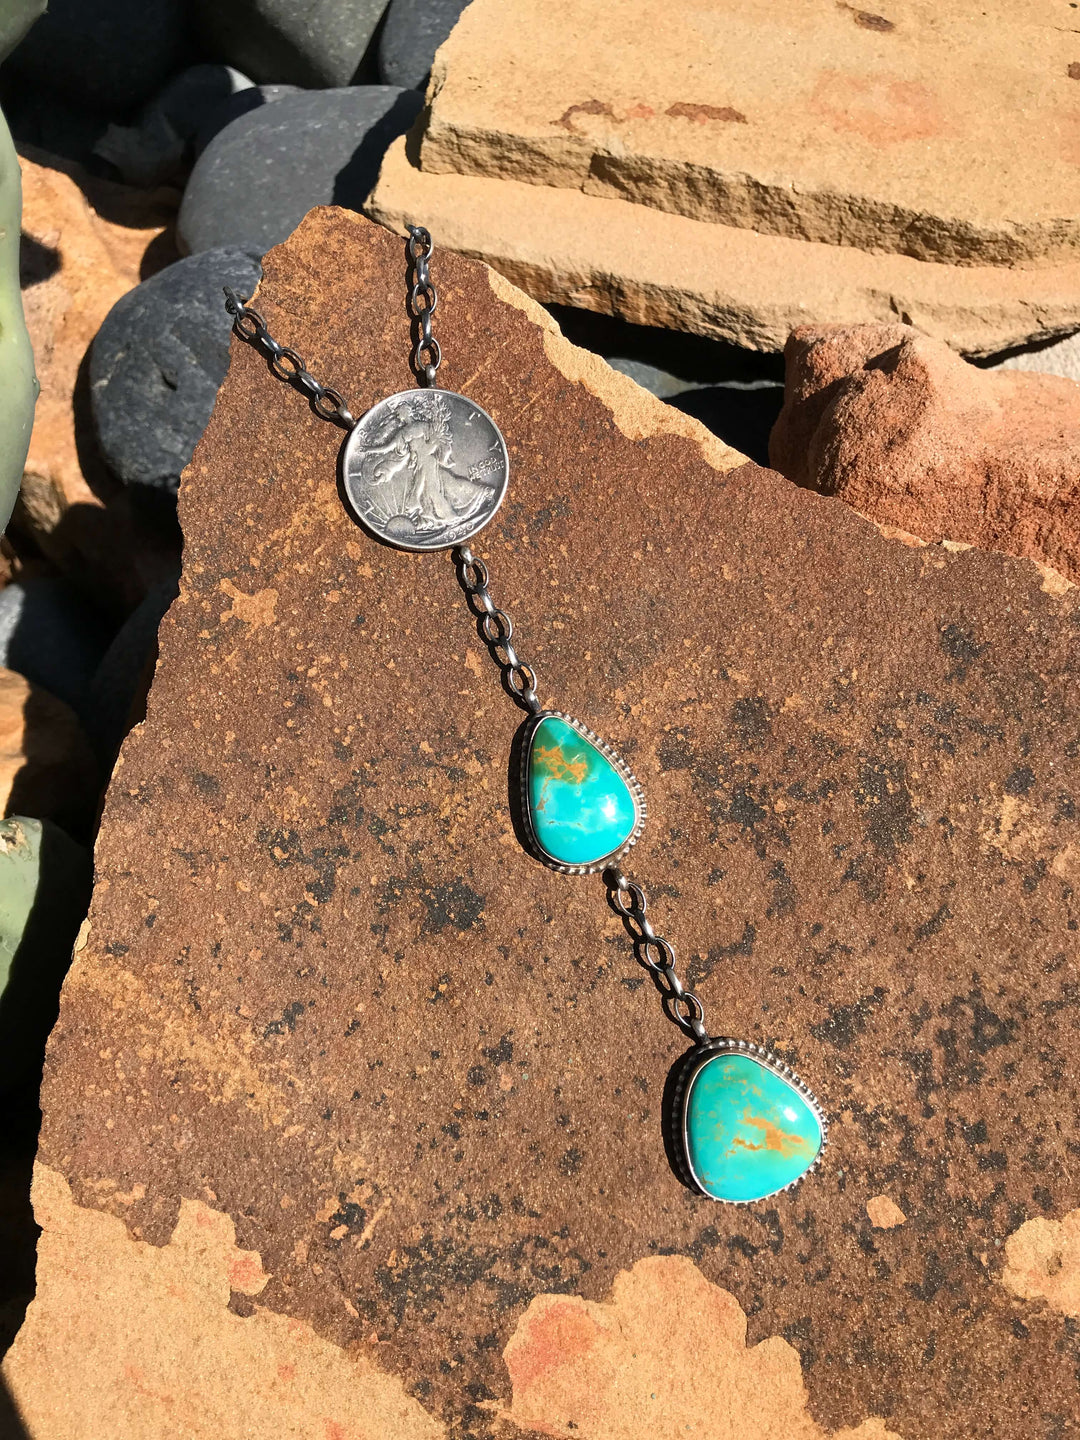 The Coin Turquoise Lariat Necklace, 2-Necklaces-Calli Co., Turquoise and Silver Jewelry, Native American Handmade, Zuni Tribe, Navajo Tribe, Brock Texas